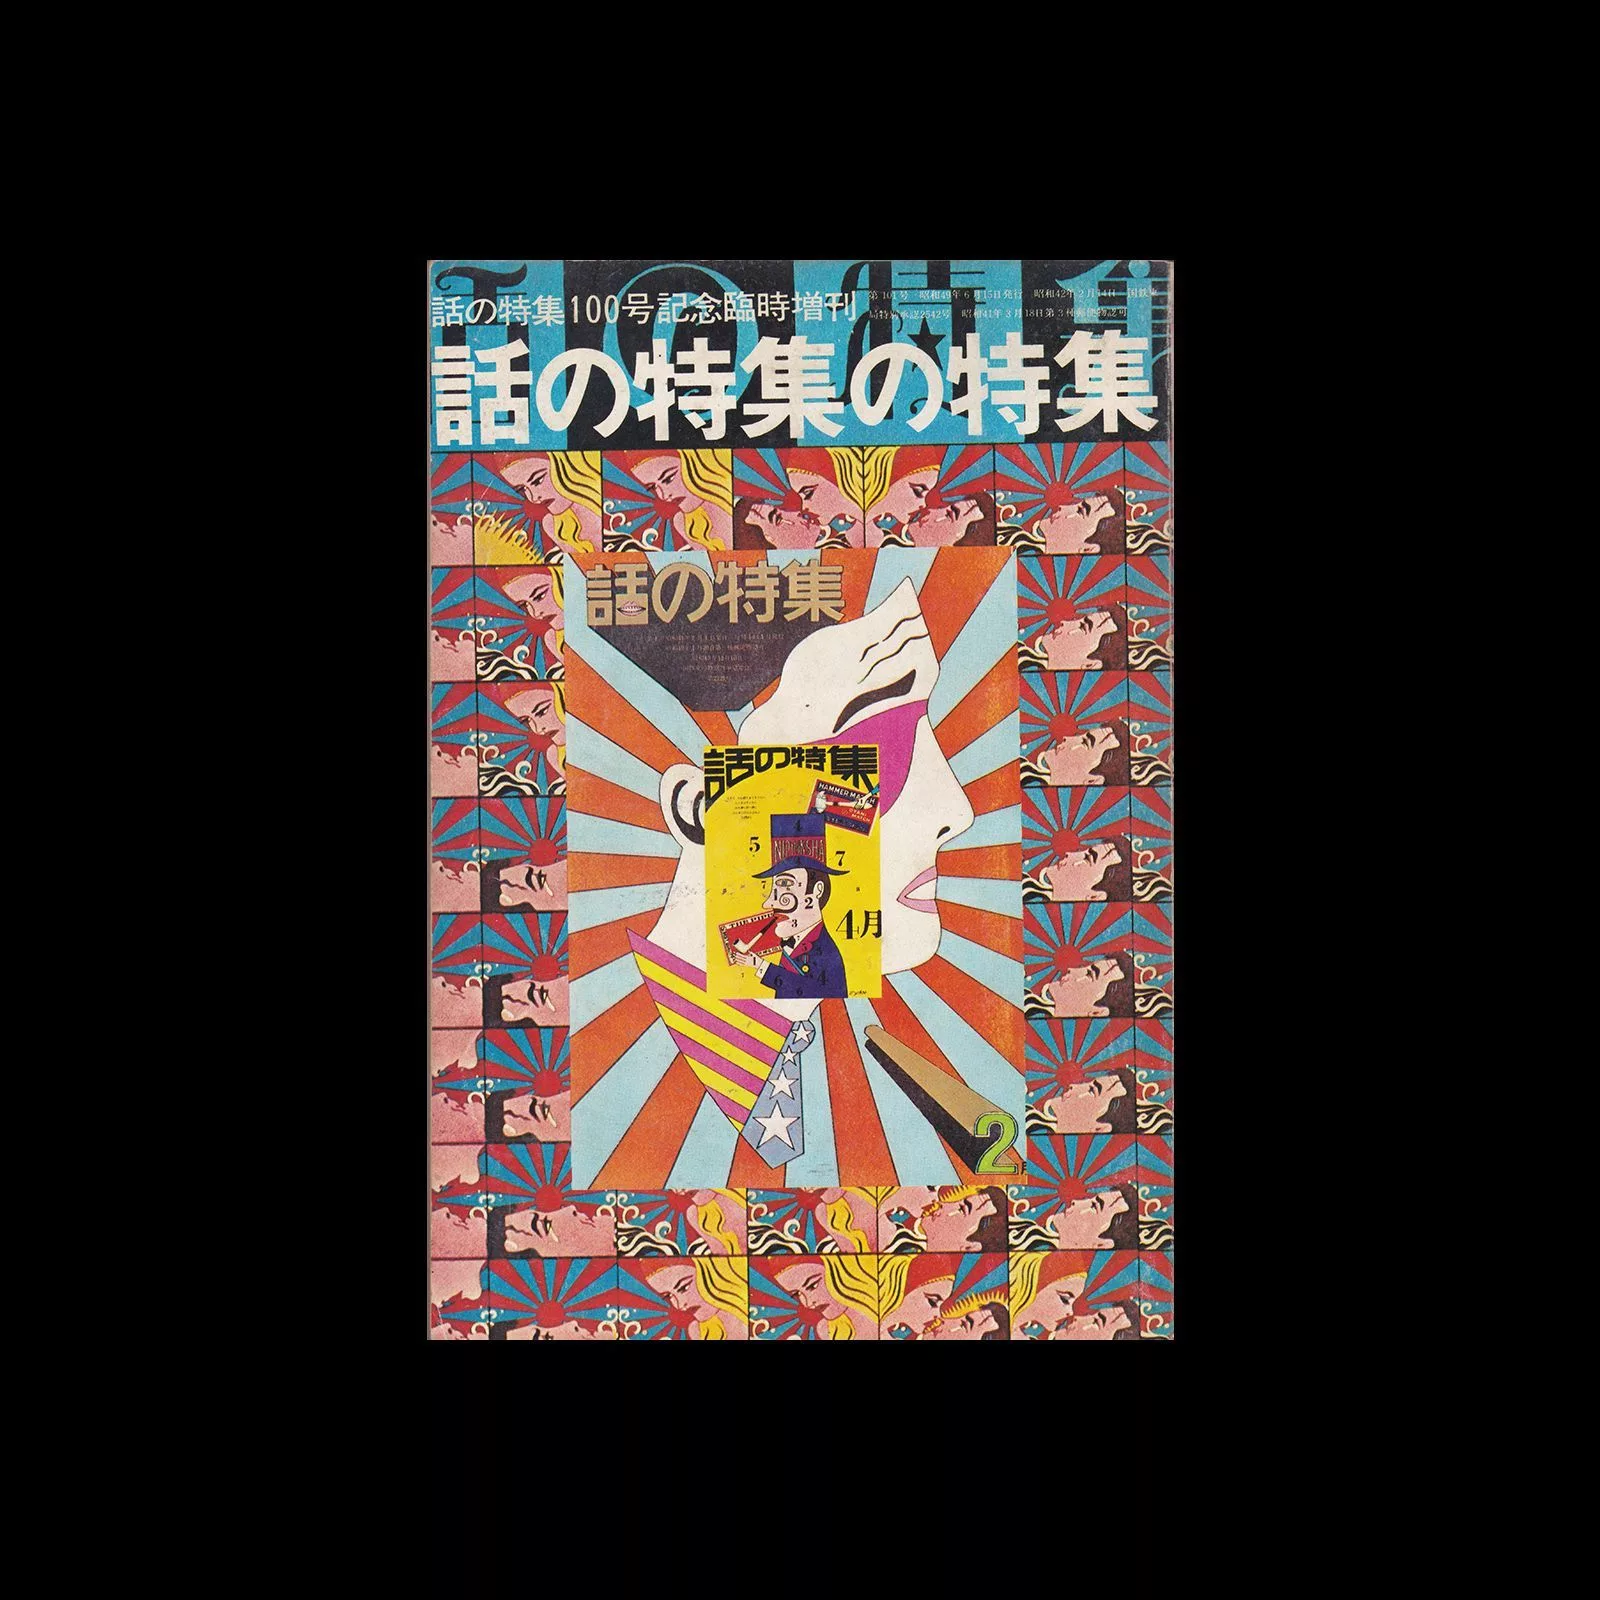 Special issue of story 100th anniversary special edition, 1974. Cover design by Tadanori Yokoo